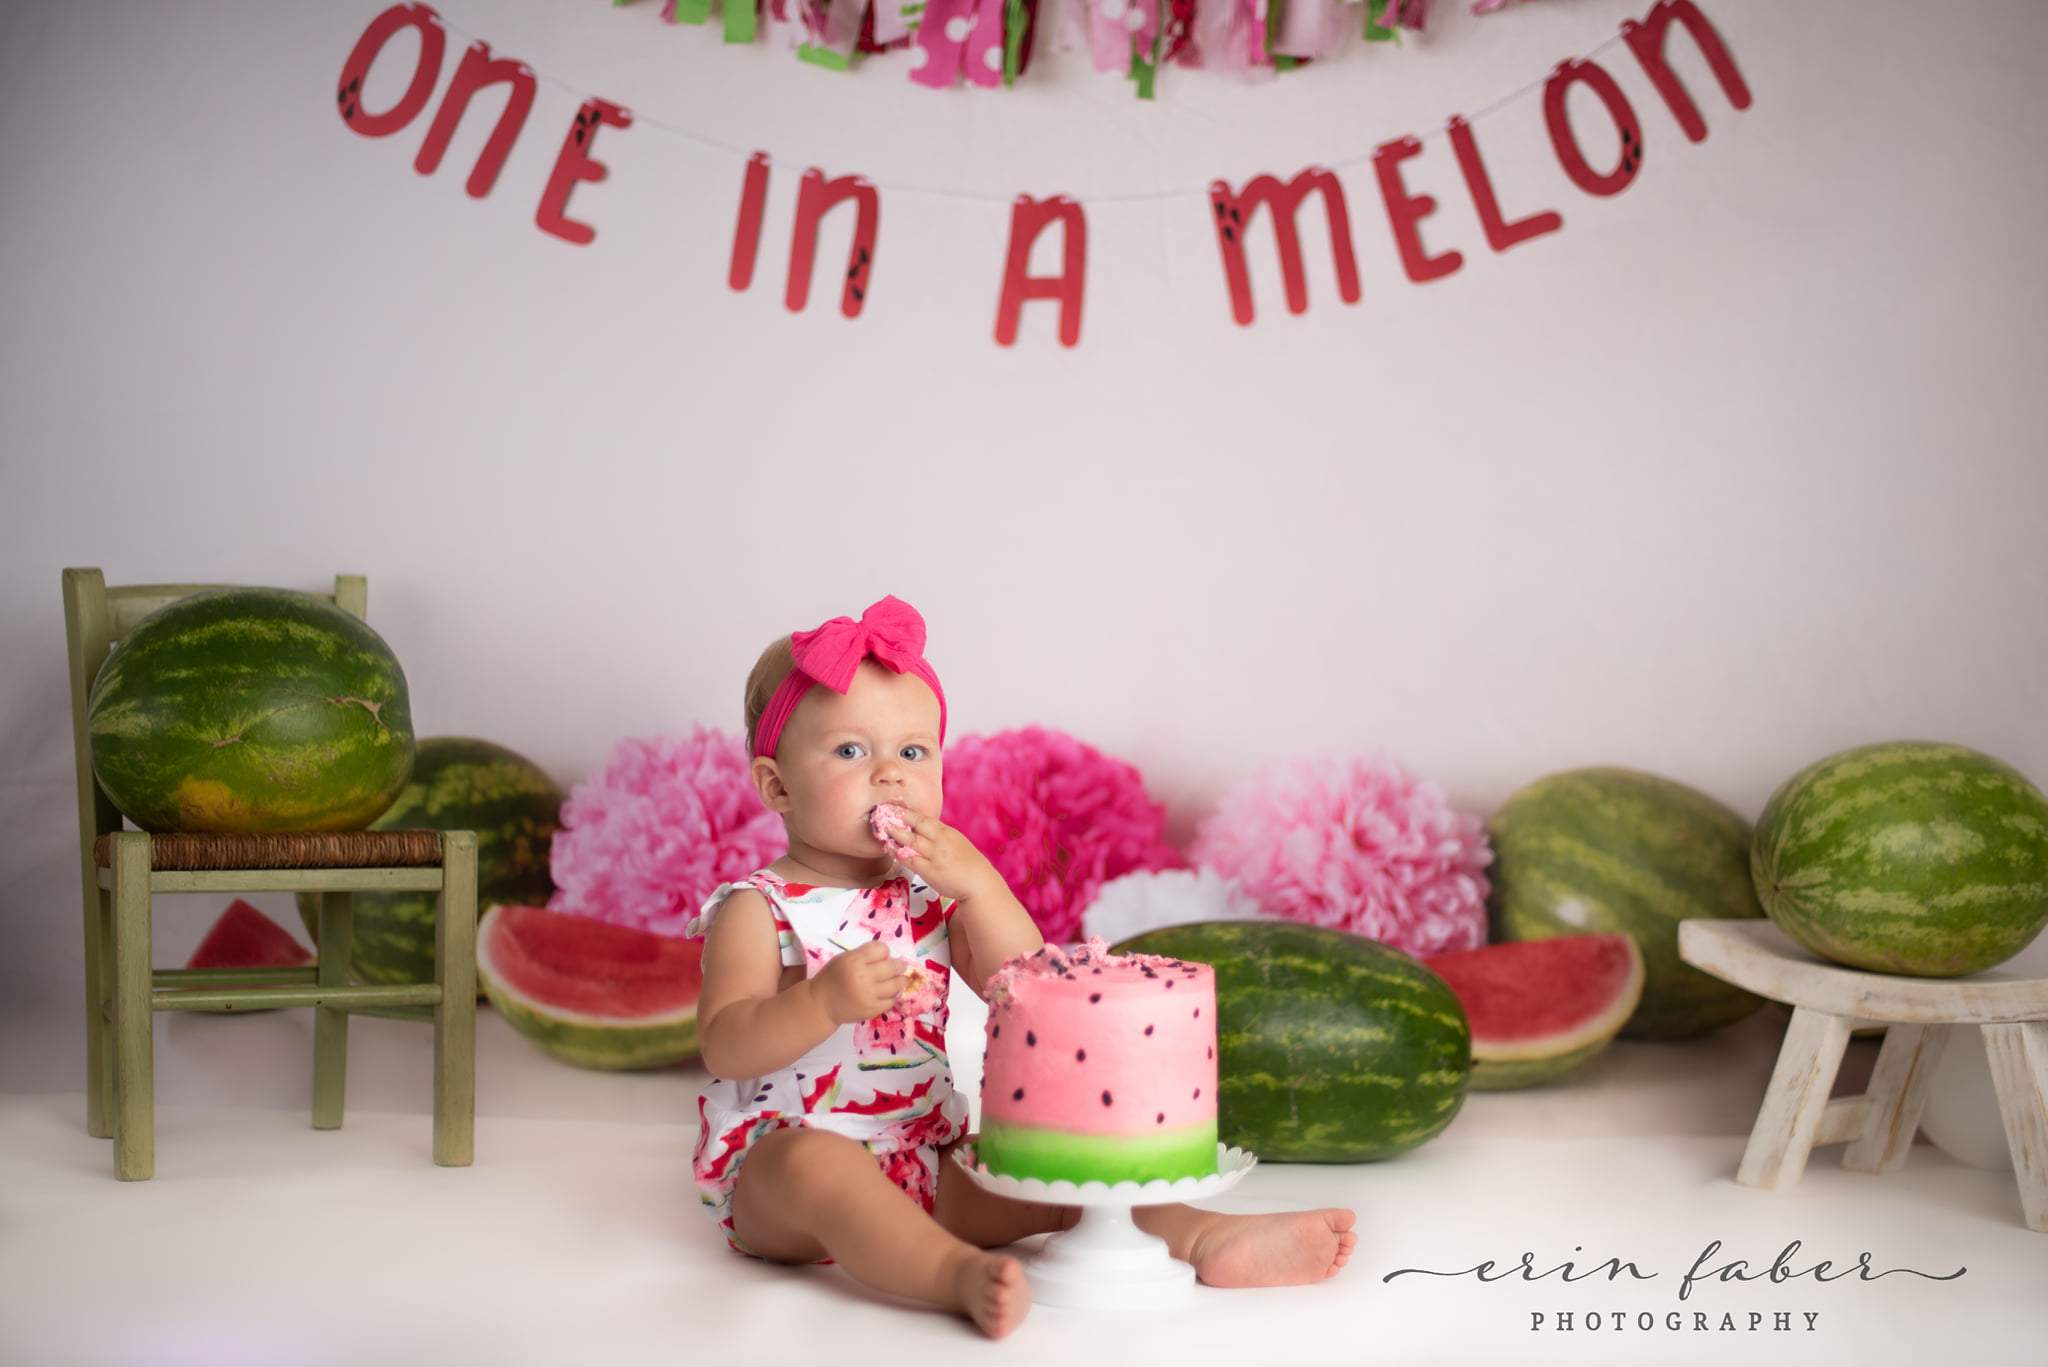 Kate Summer One in A Melon First Birthday Backdrop for Photography Designed by Mandy Ringe Photography - Kate Backdrop